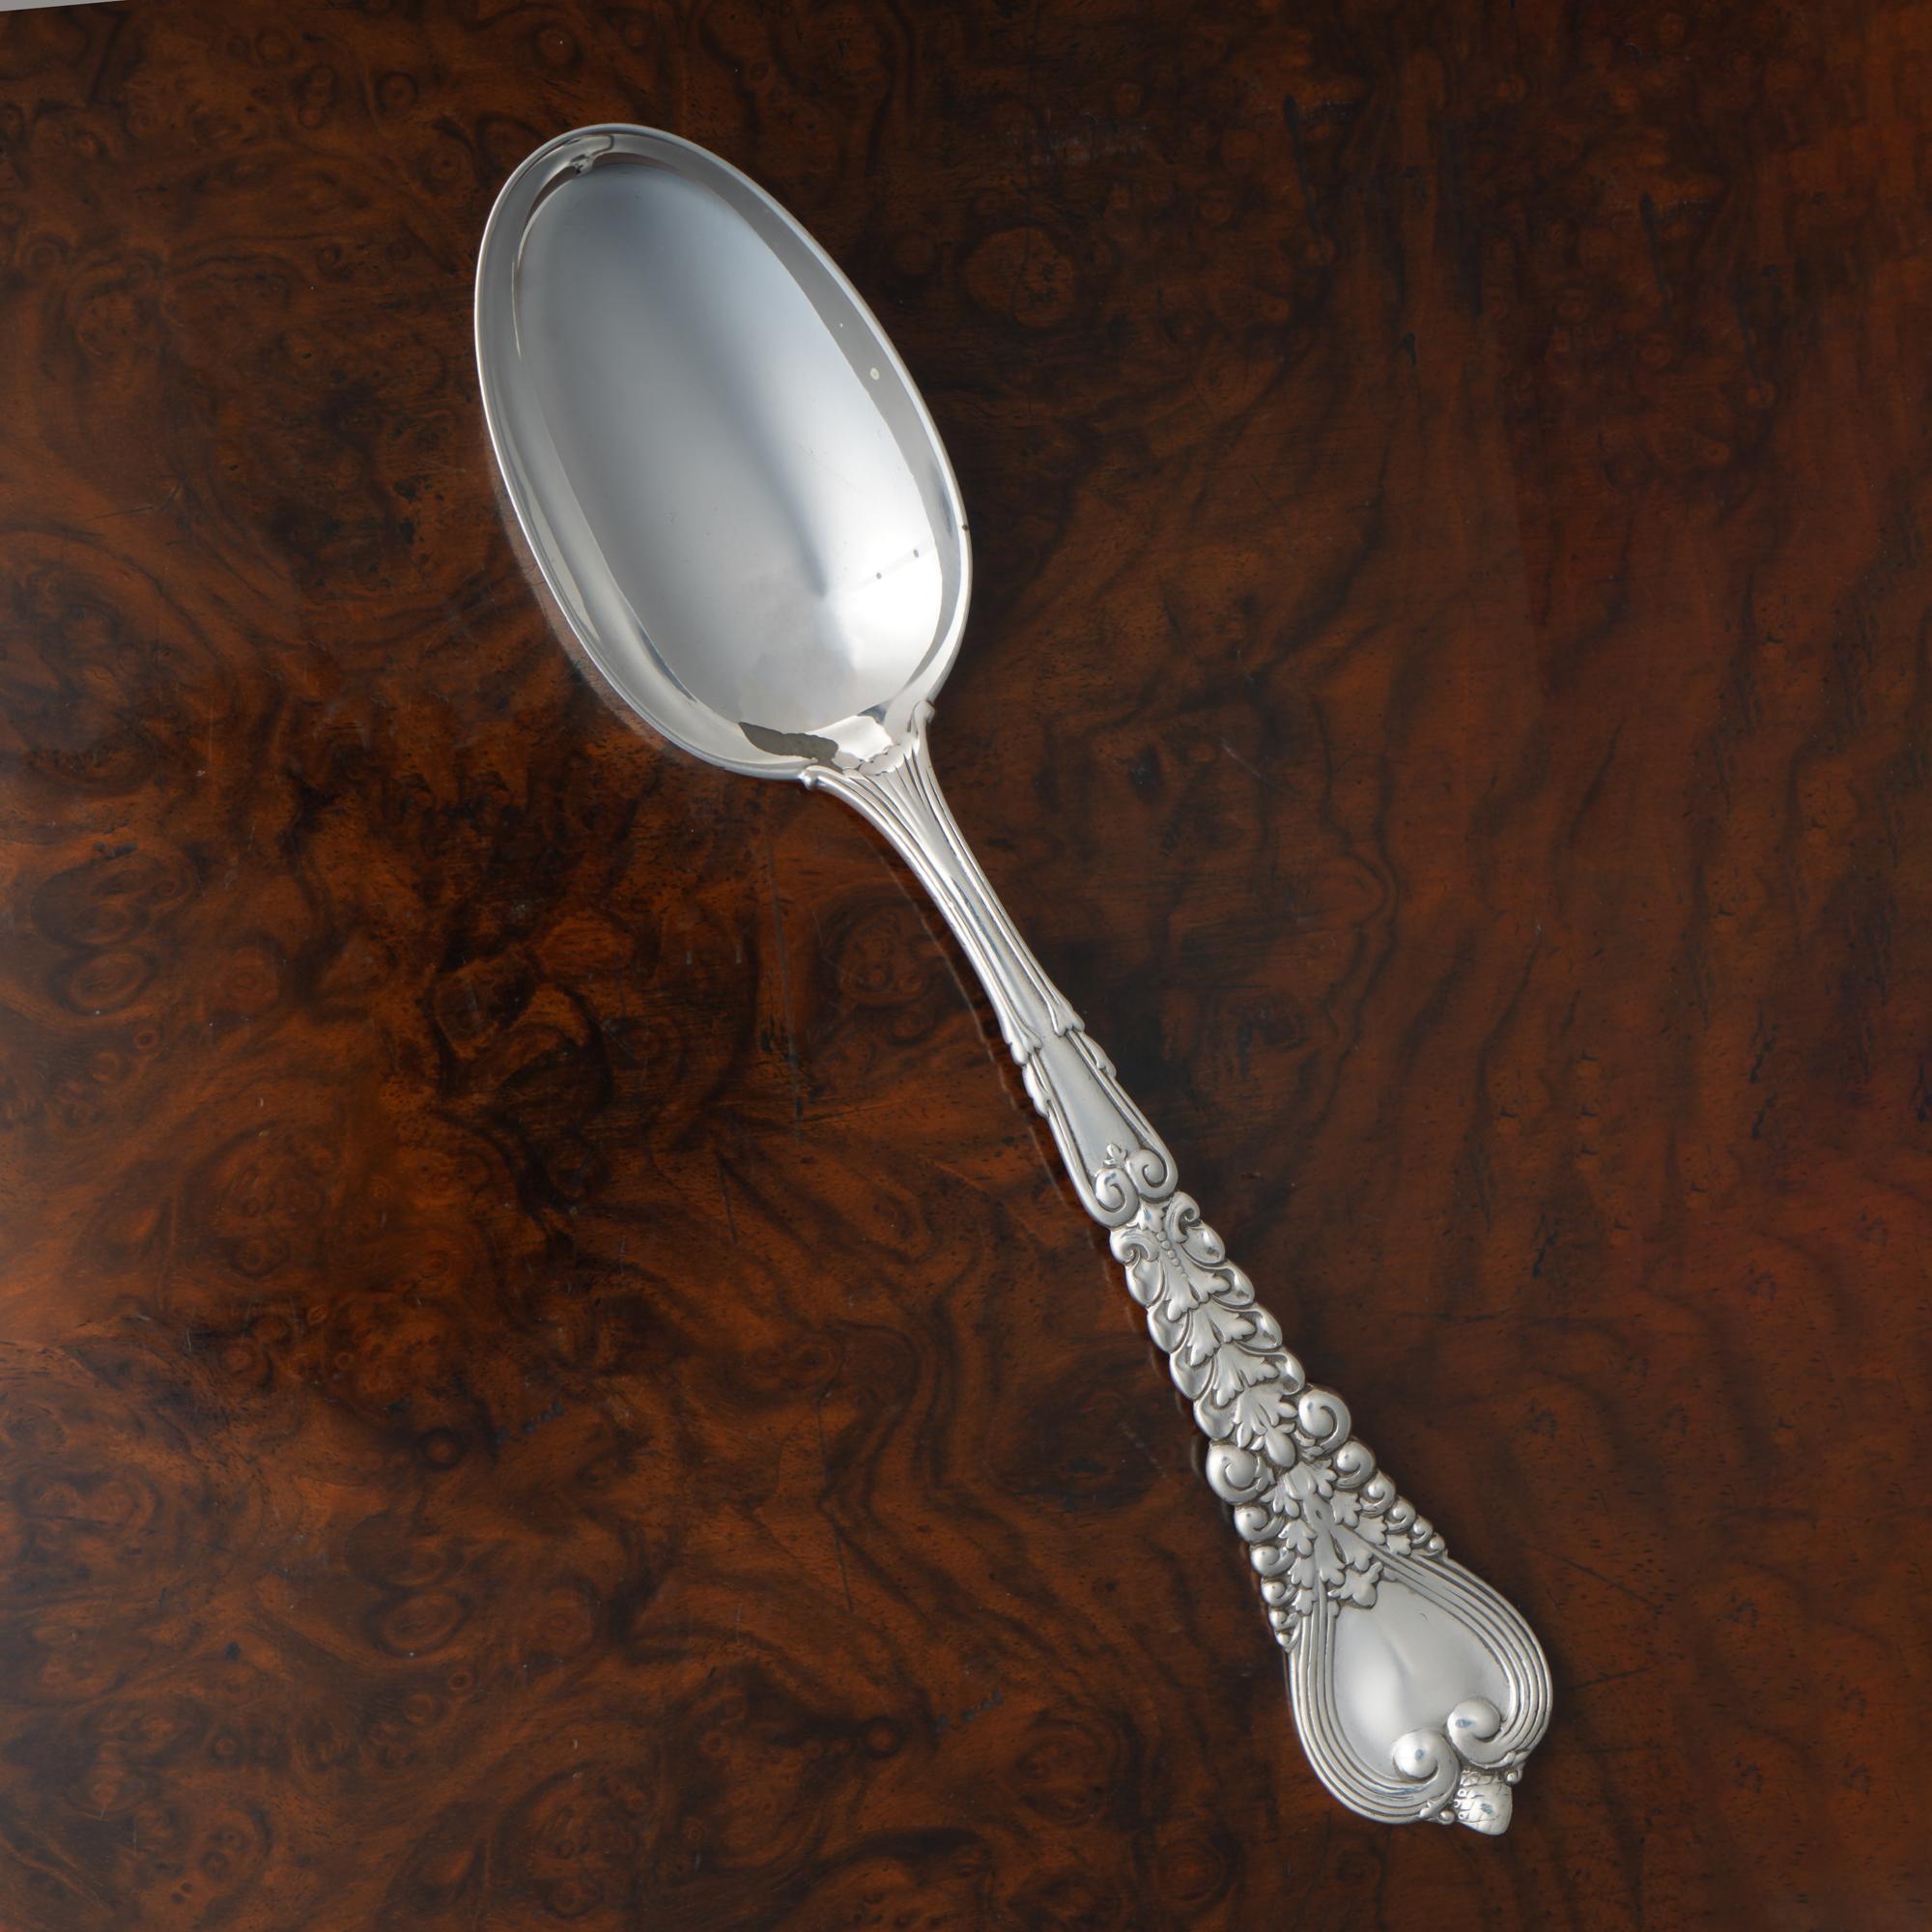 Antique Tiffany & Co. sterling silver Florentine pattern dessert spoon

Maker: Tiffany & Co
Pattern: Designed by Paulding Farnham
Style: Renaissance Revival
Introduced 1900, but the patent application not filed until May 9, 1904, issued June 7,